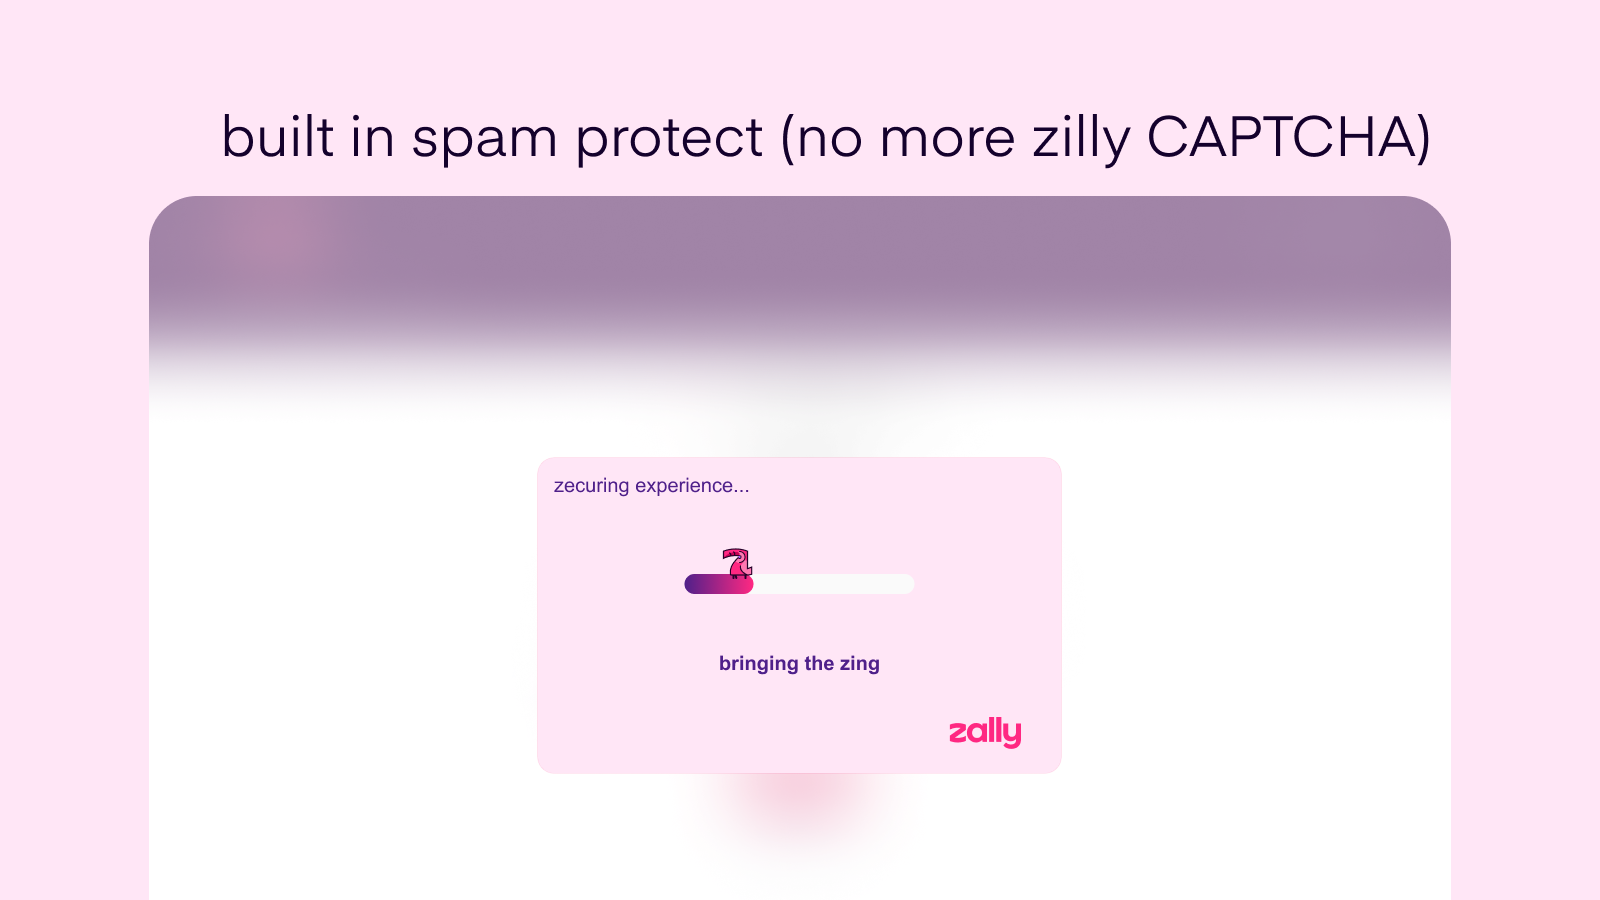 built in spam protect (no more zilly reCAPTCHA)